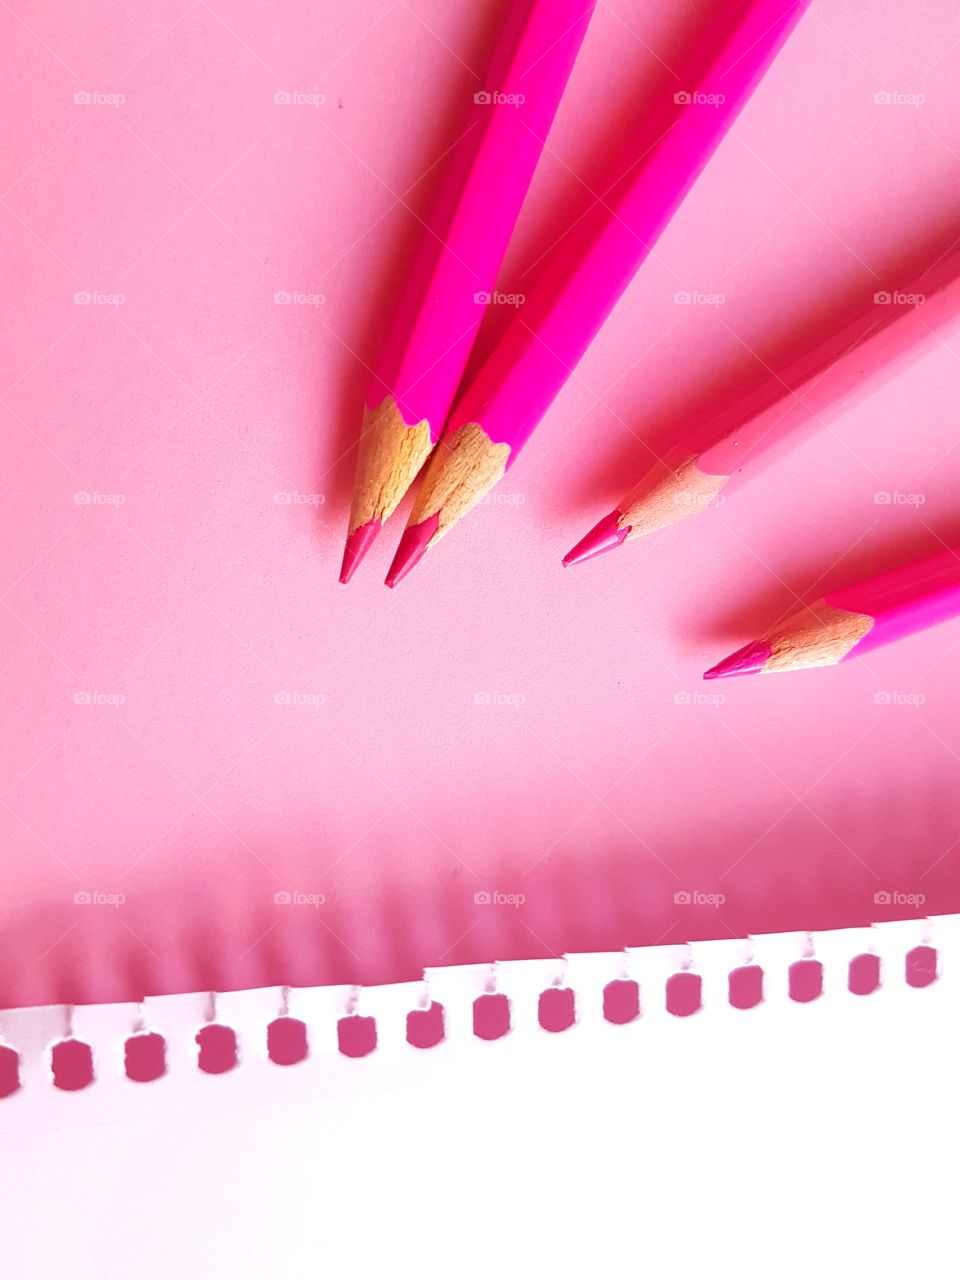 Pink colored pencil